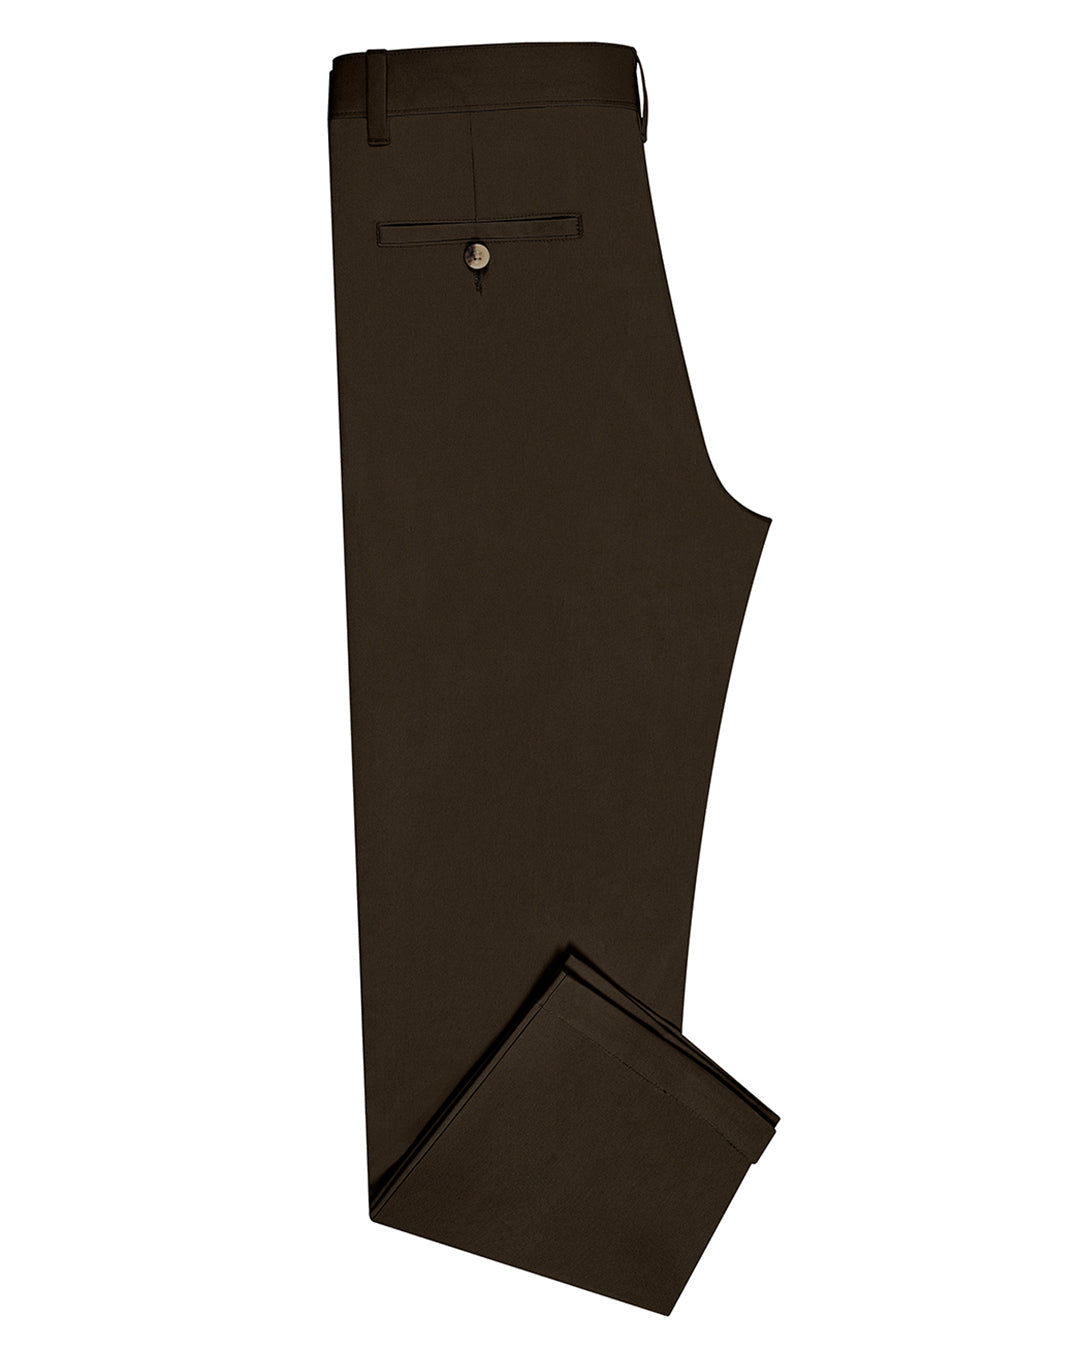 Side view of custom Genoa Chino pants for men by Luxire in choco brown